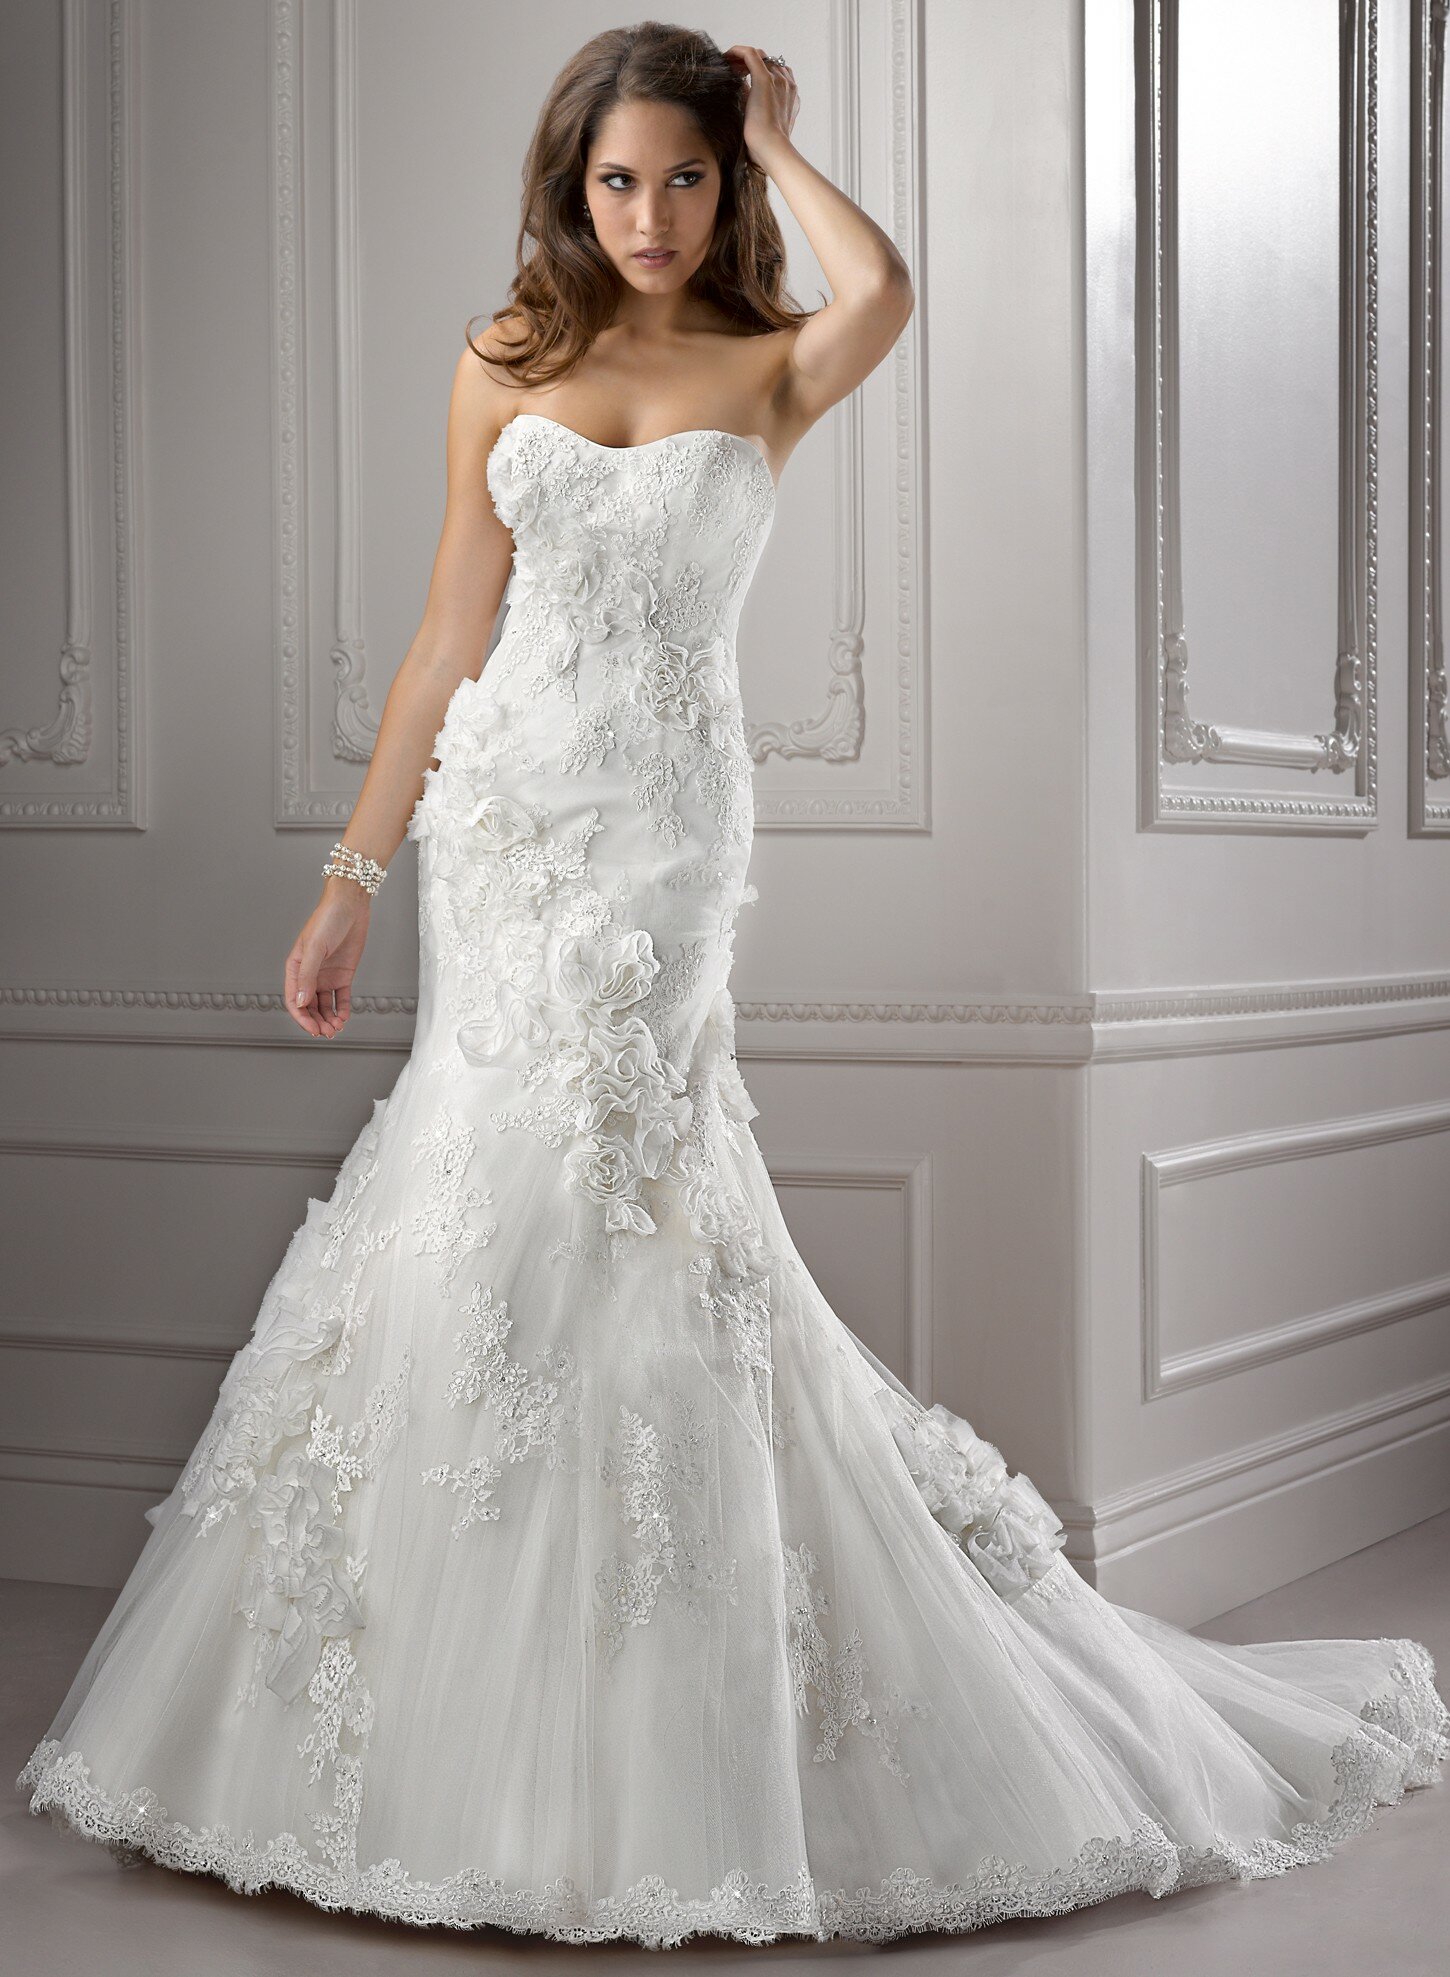 Wedding dresses with sleeves plus size Photo - 5